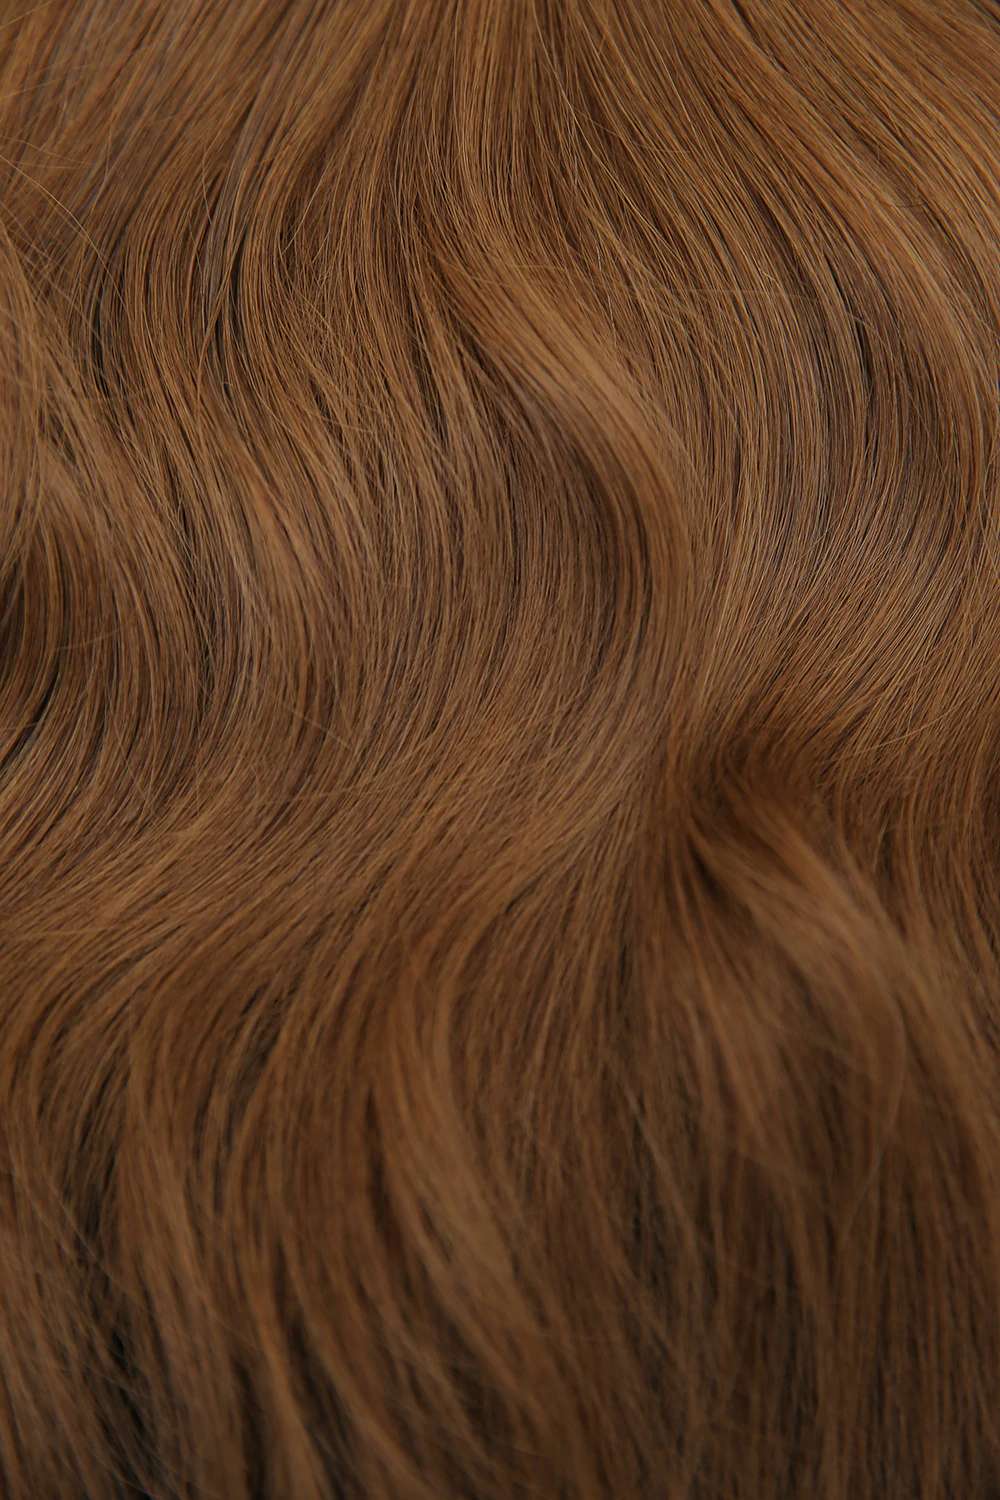 #6 Chestnut Brown Hand Tied Weft Extensions